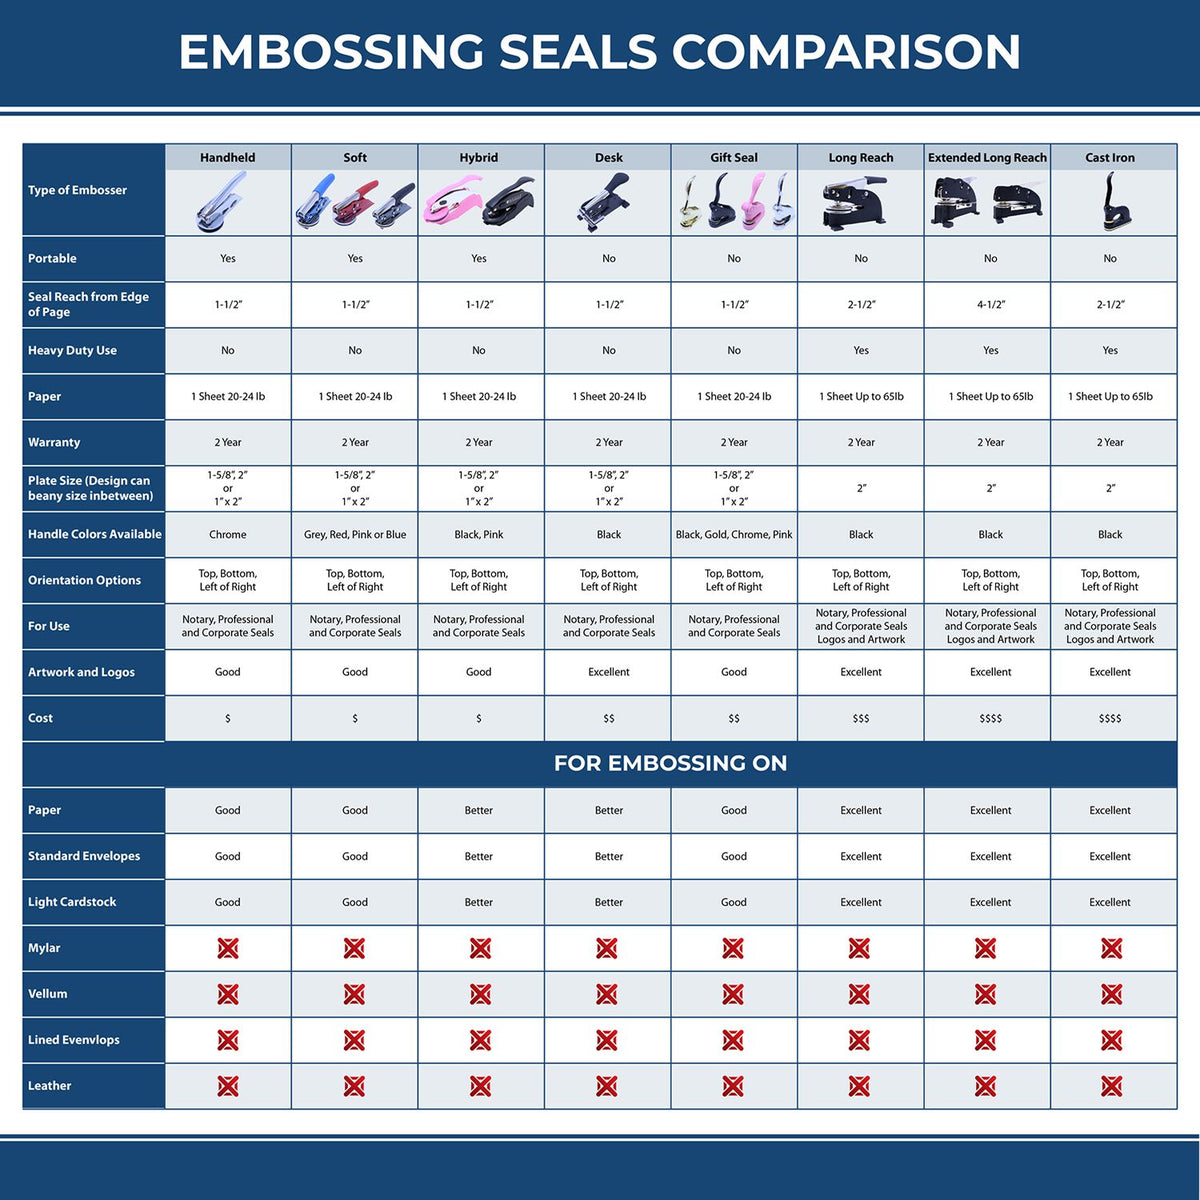 A comparison chart for the different types of mount models available for the Gift Ohio Land Surveyor Seal